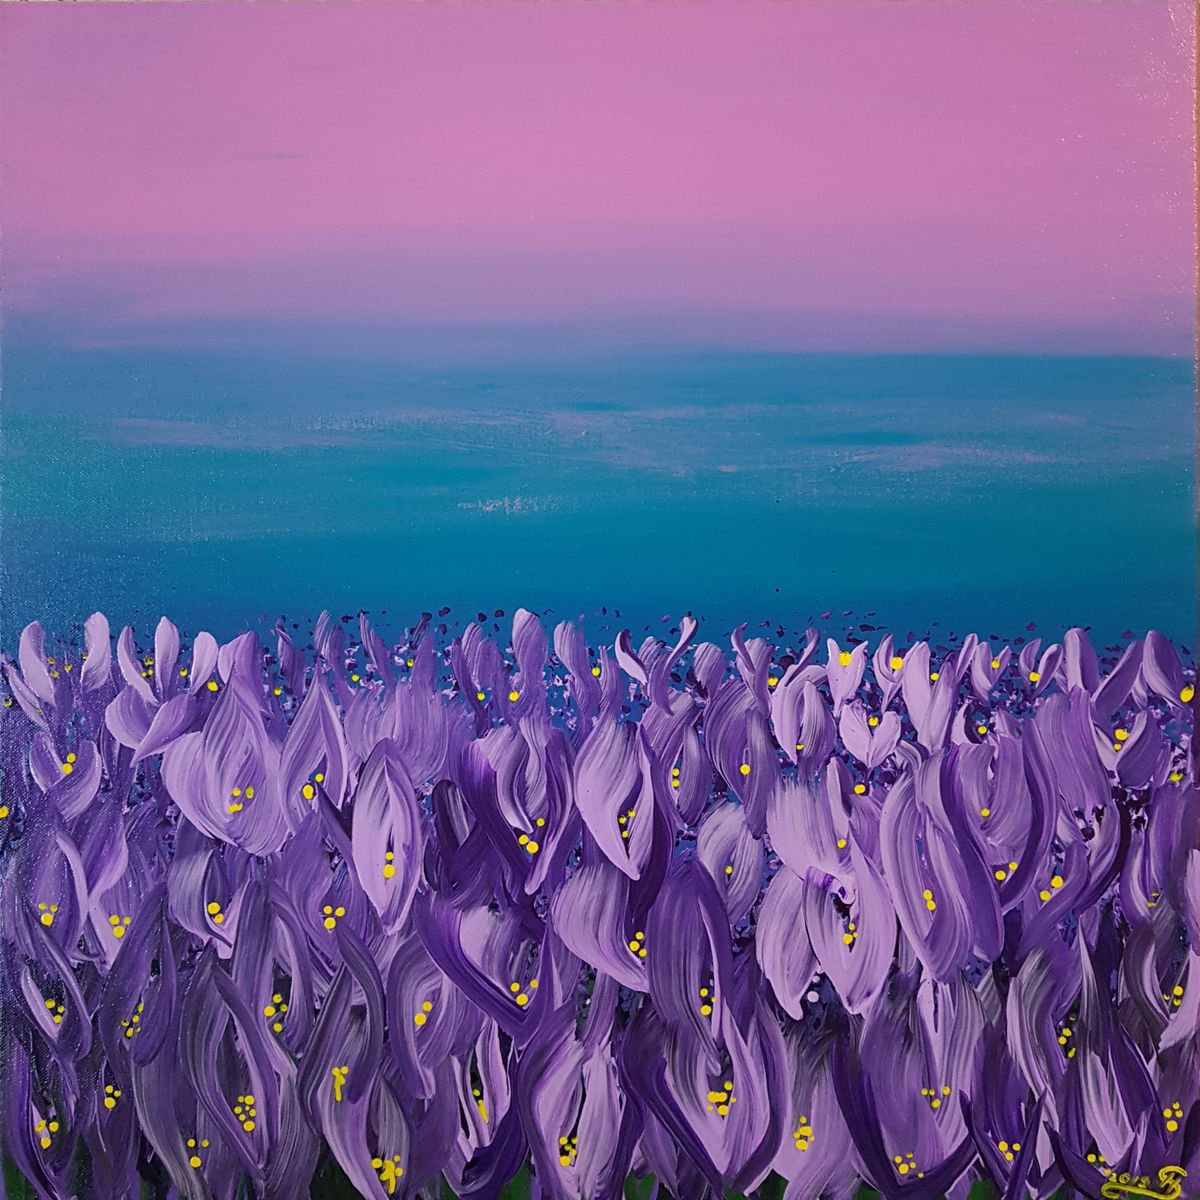 Dreaming of a field of crocus, 50x50cm, ready to hang by Silvija Horvat